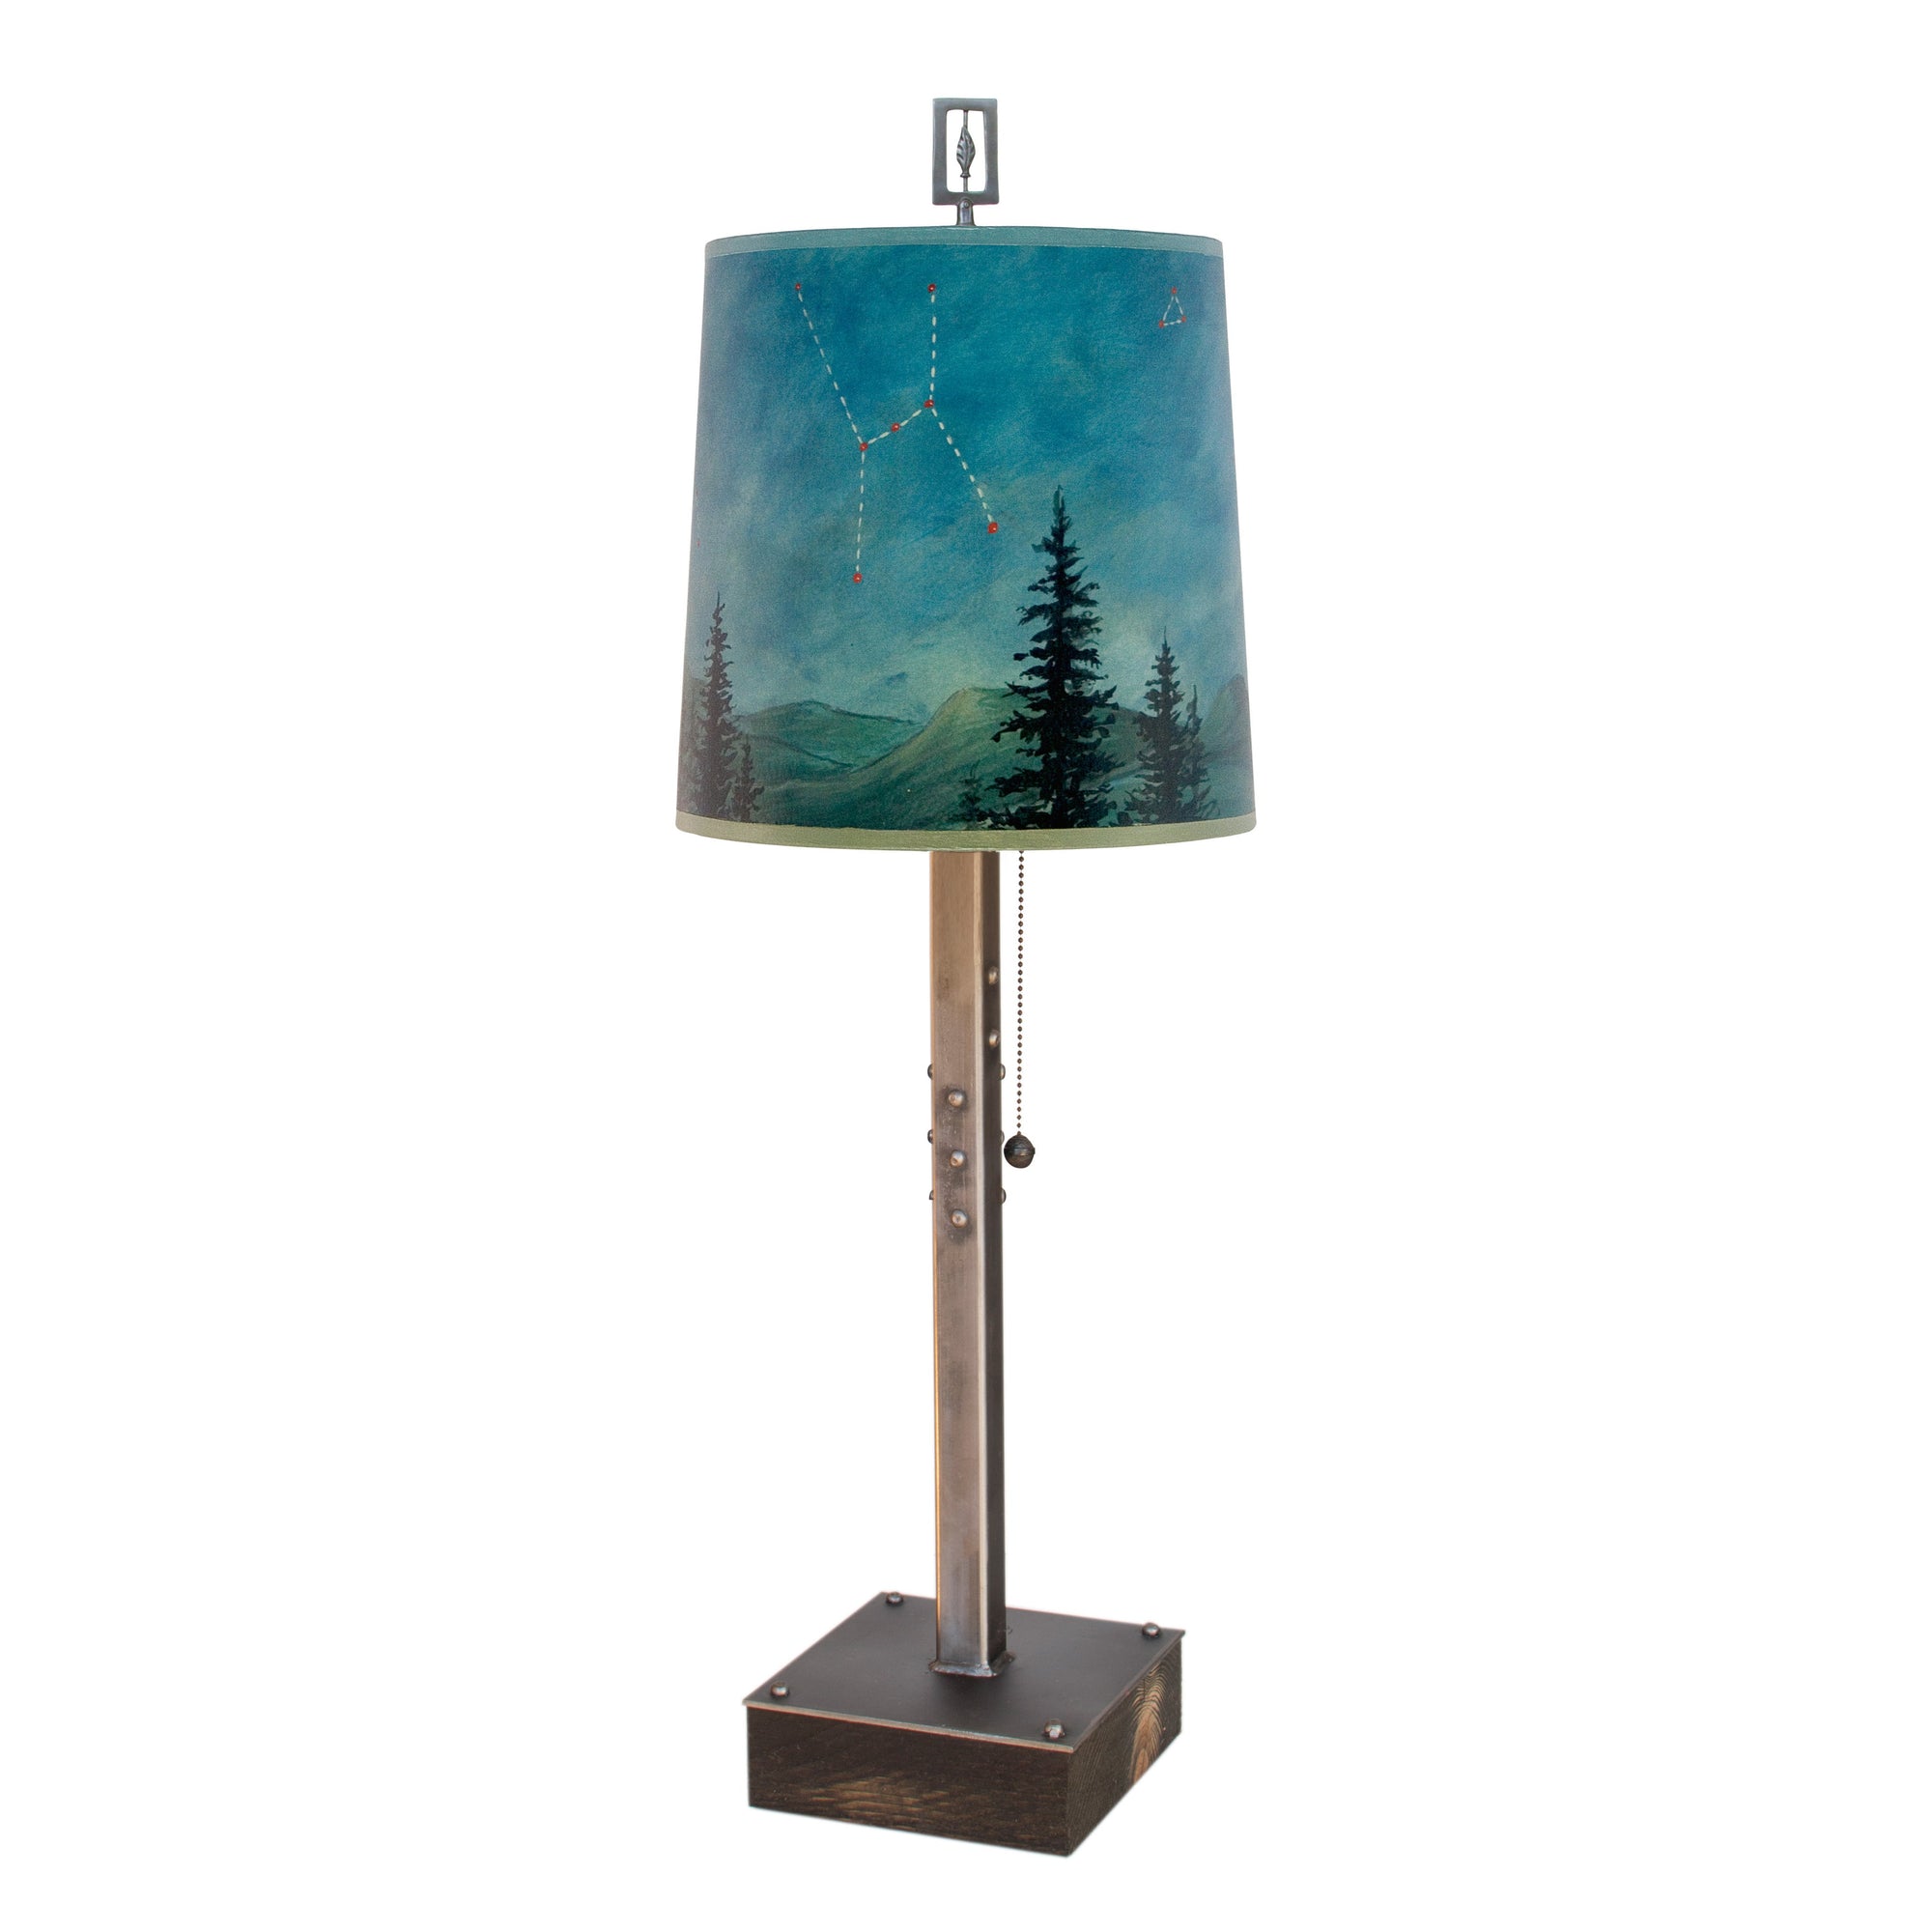 Janna Ugone & Co Table Lamps Steel Table Lamp on Wood with Medium Drum Shade in Midnight Sky